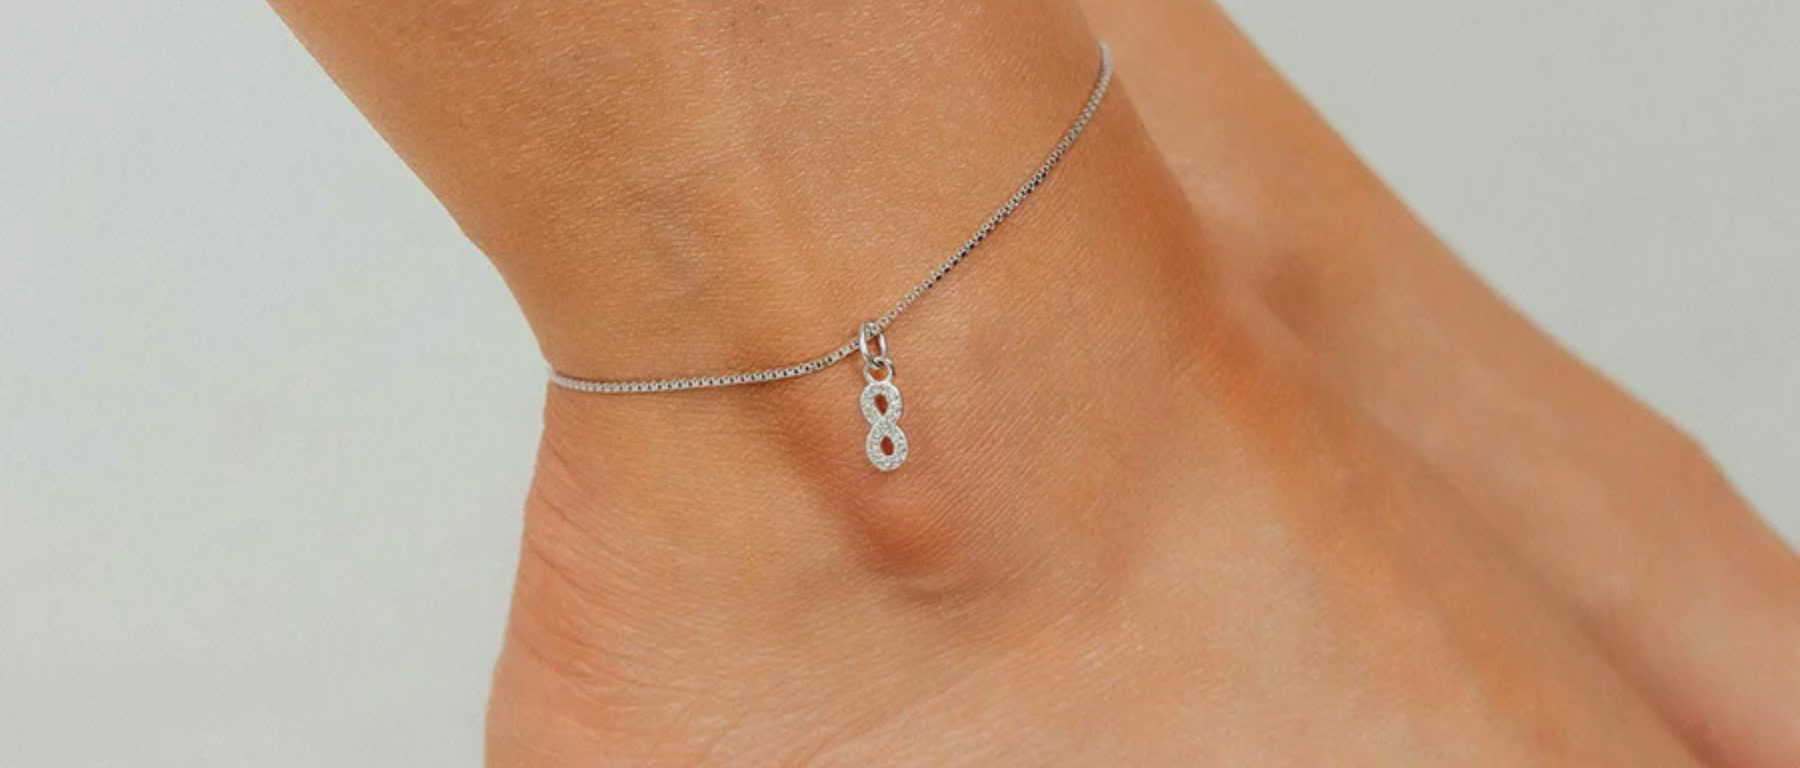 wehoautodetail INFINITY CZ CHARM ADJUSTABLE ANKLET